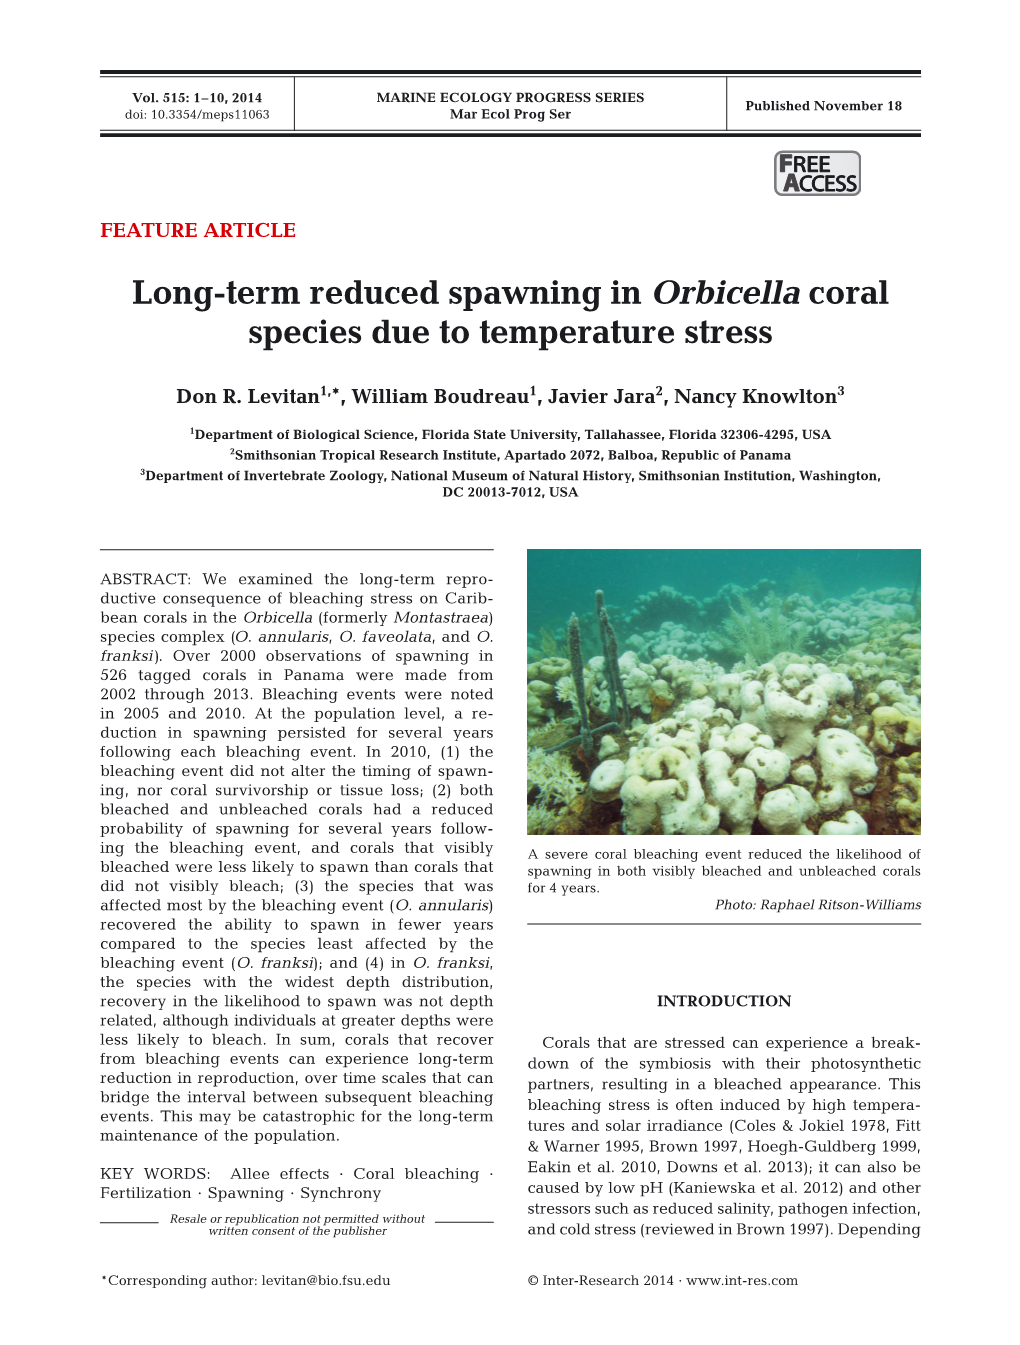 Long-Term Reduced Spawning in Orbicella Coral Species Due to Temperature Stress